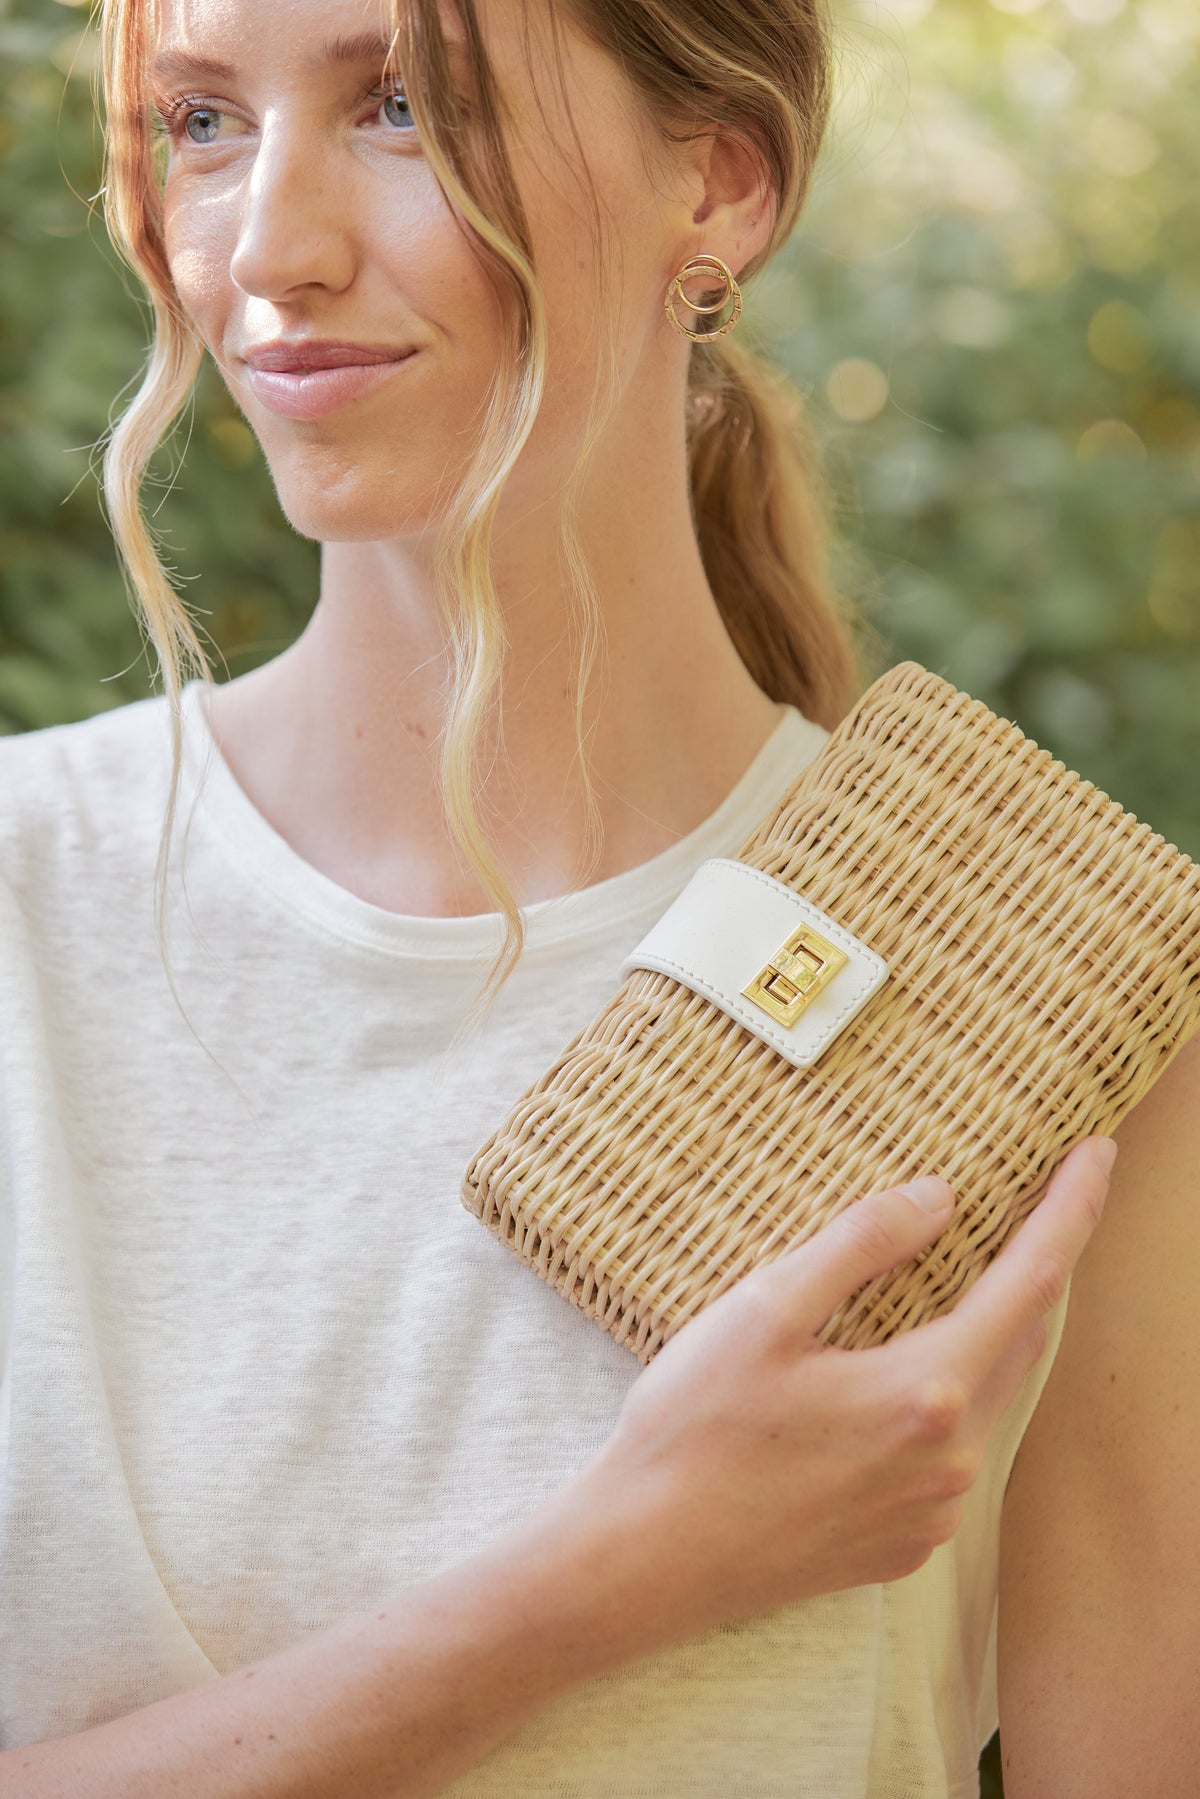 Lou Wicker Straw Clutch Bag in Natural and White